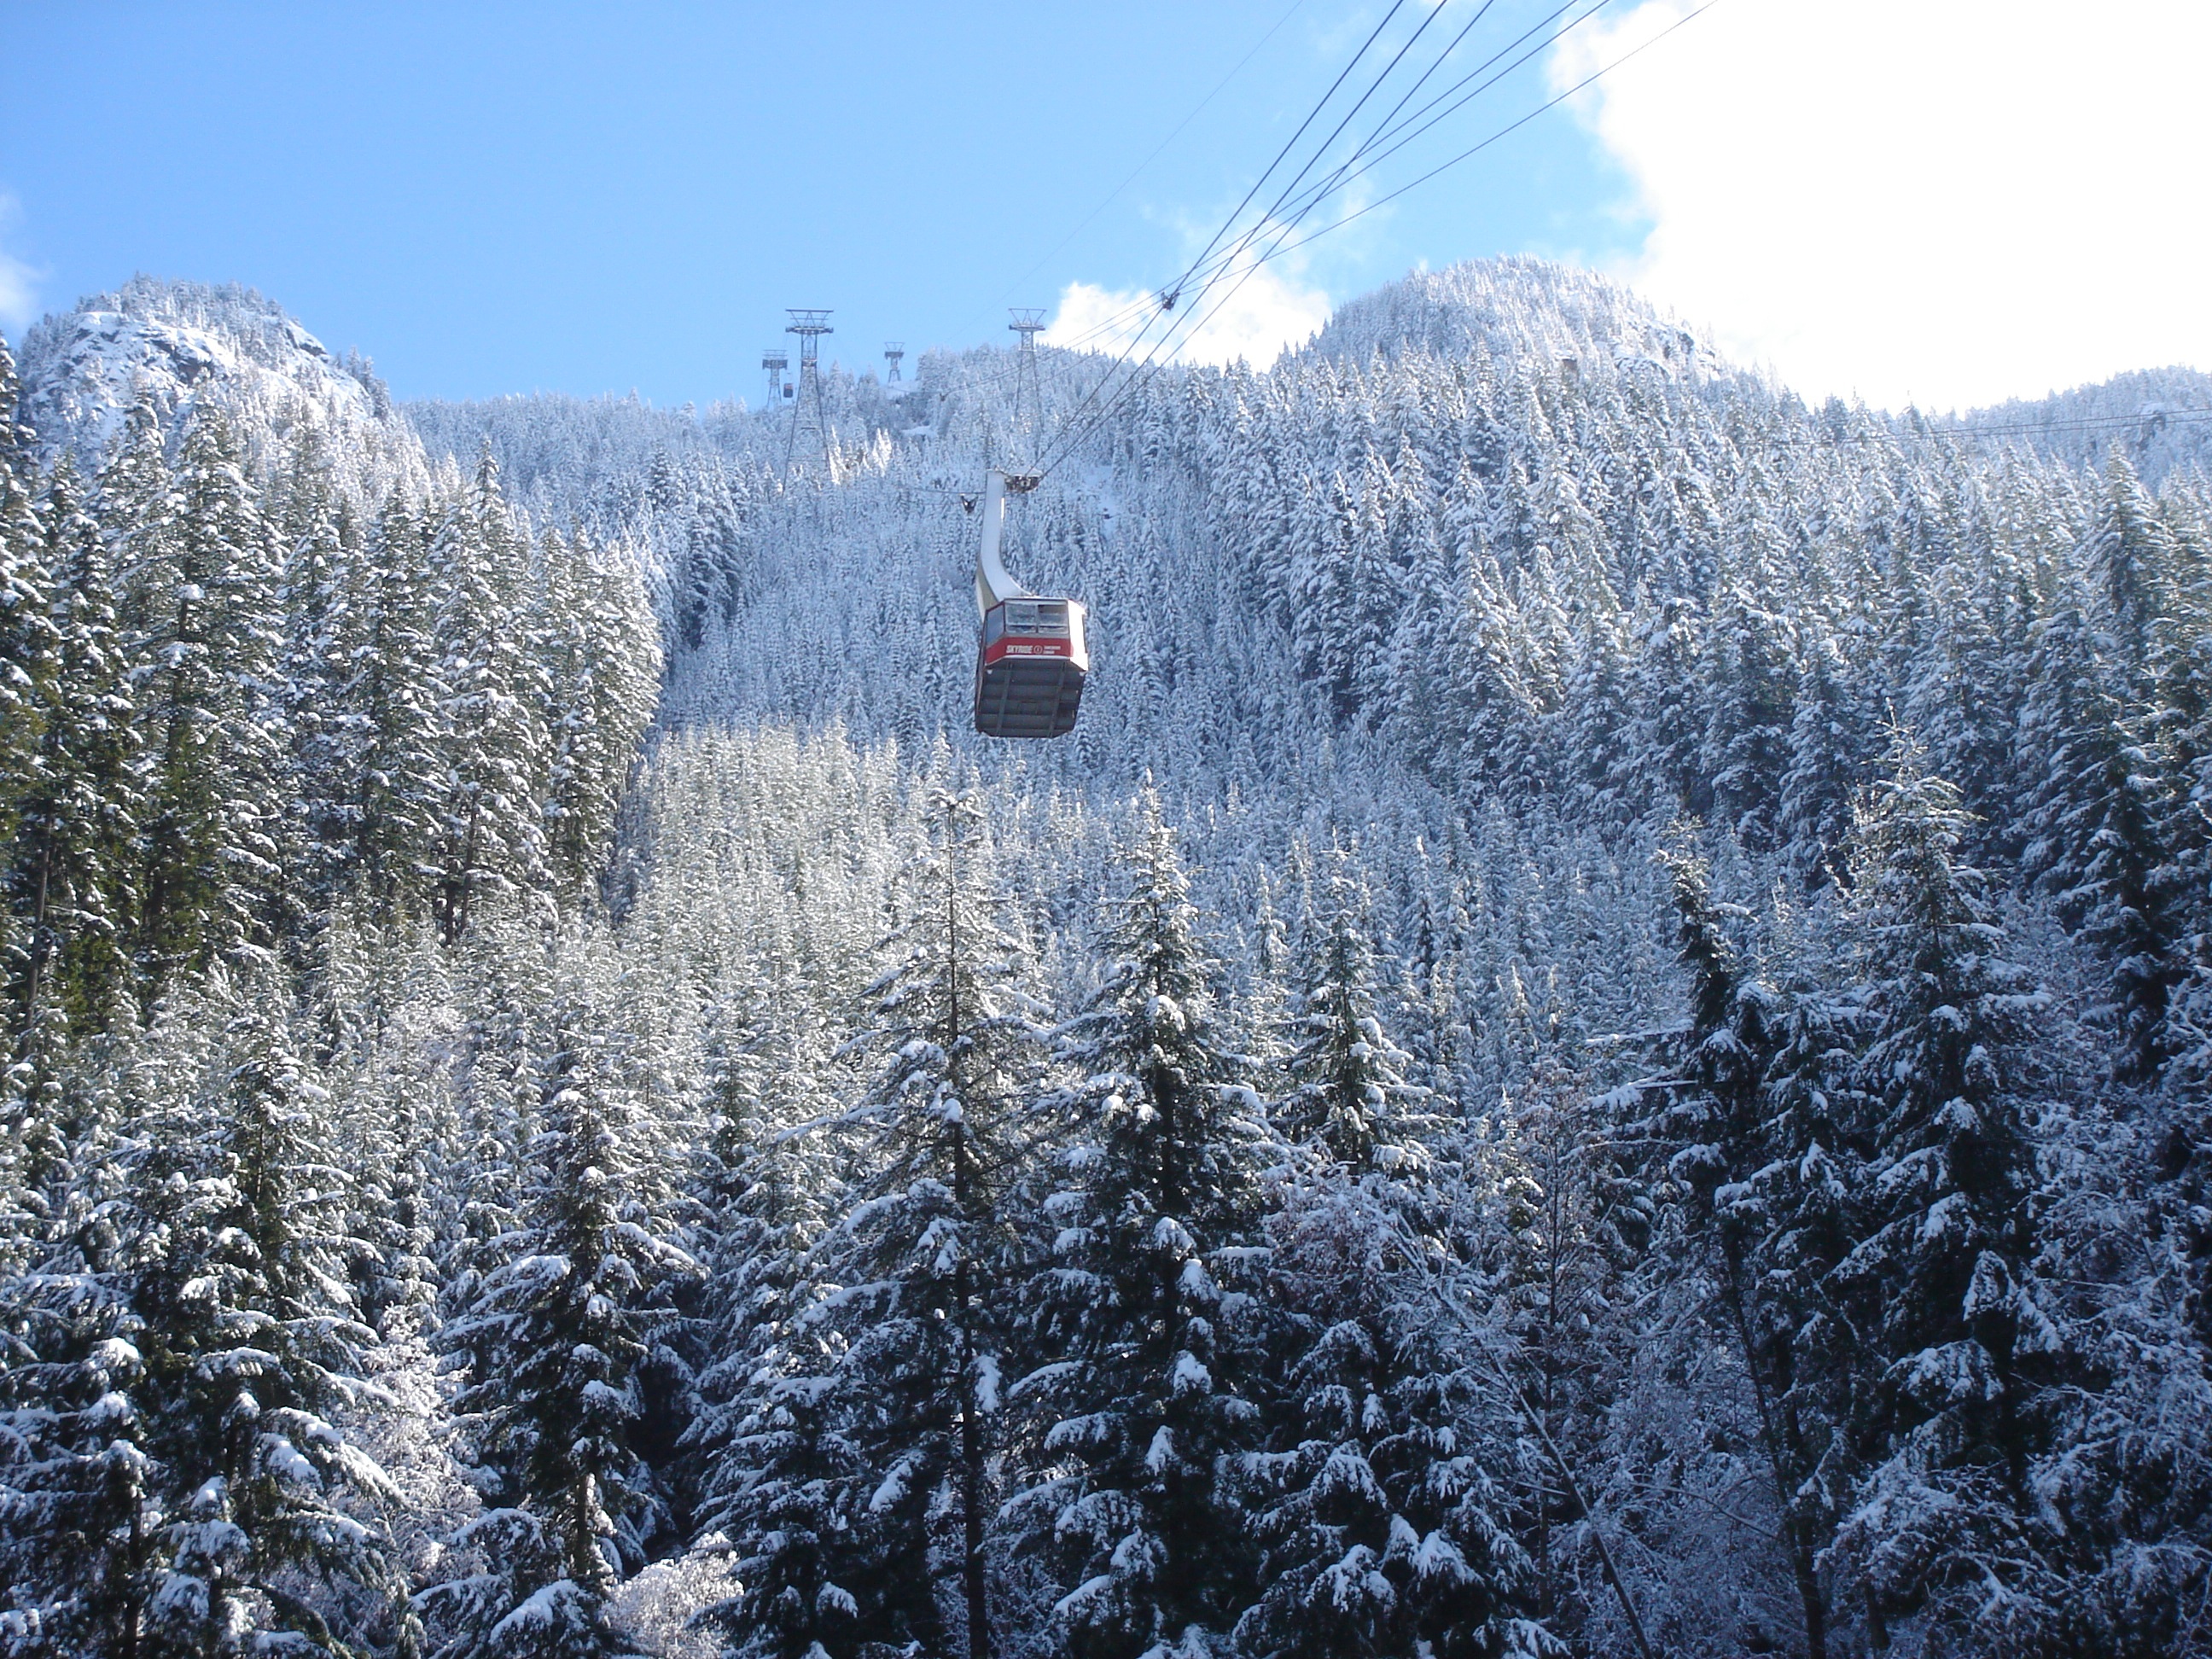 Free HD winter, nature, trees, car, railway carriage, cable car, cableway